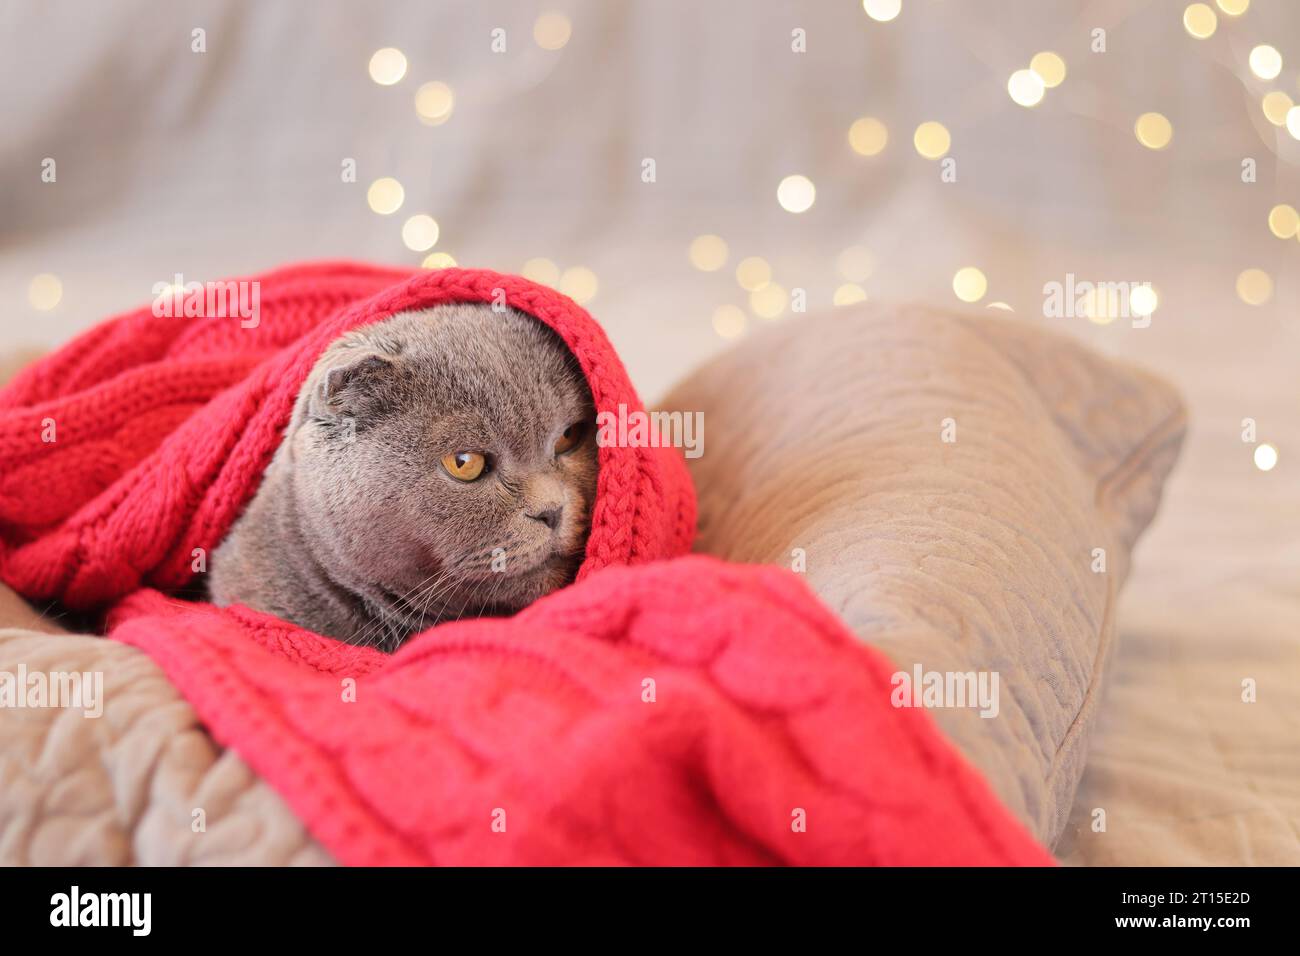 British cat in bed against the background of garland lights. A beautiful gray shorthair cat in a red scarf lies on a pillow. Pet and New Year or Chris Stock Photo